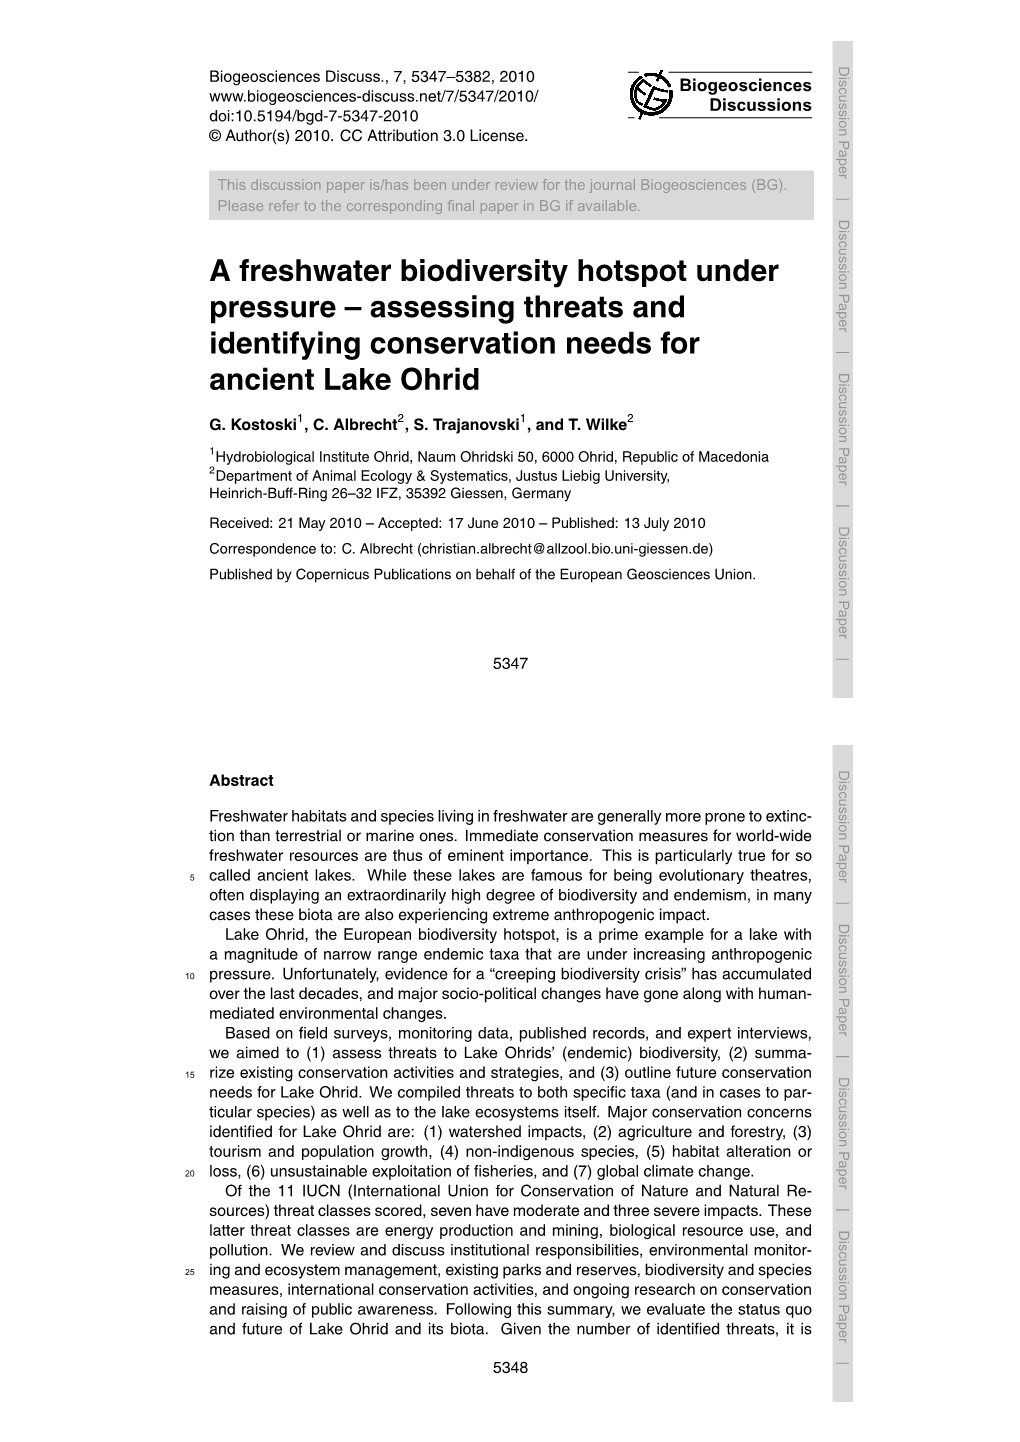 A Freshwater Biodiversity Hotspot Under Pressure – Assessing Threats and Identifying Conservation Needs for Ancient Lake Ohrid G